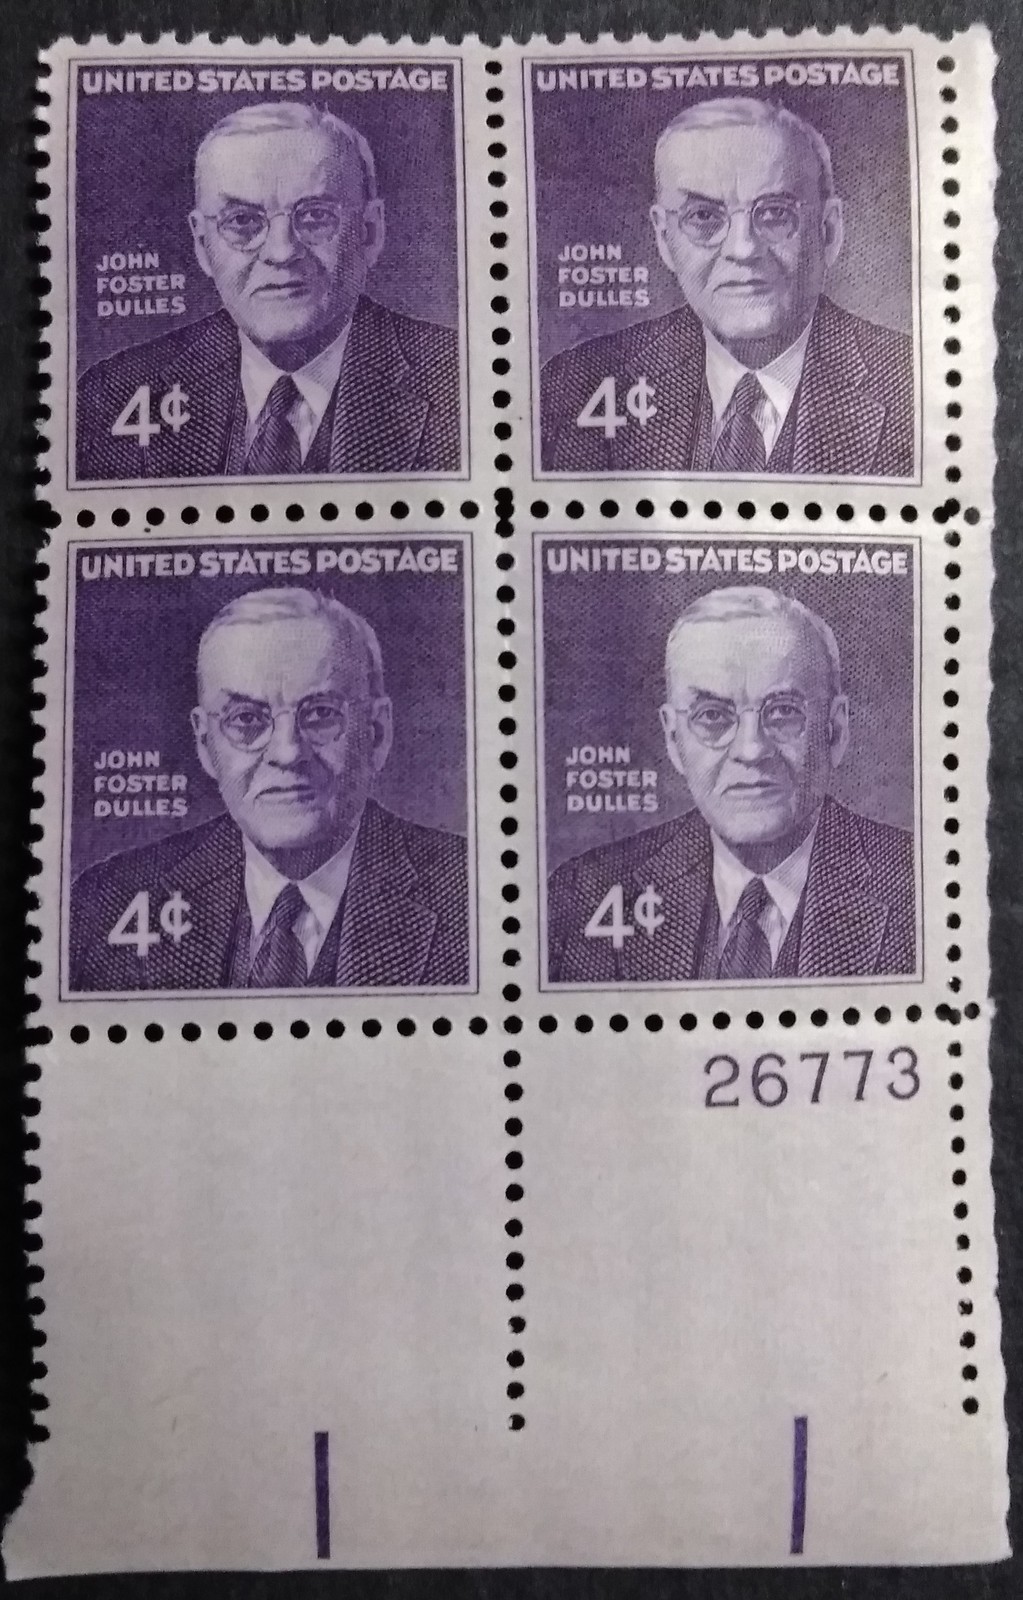 Primary image for John Foster Dulles Set of Four Unused US Postage Stamps